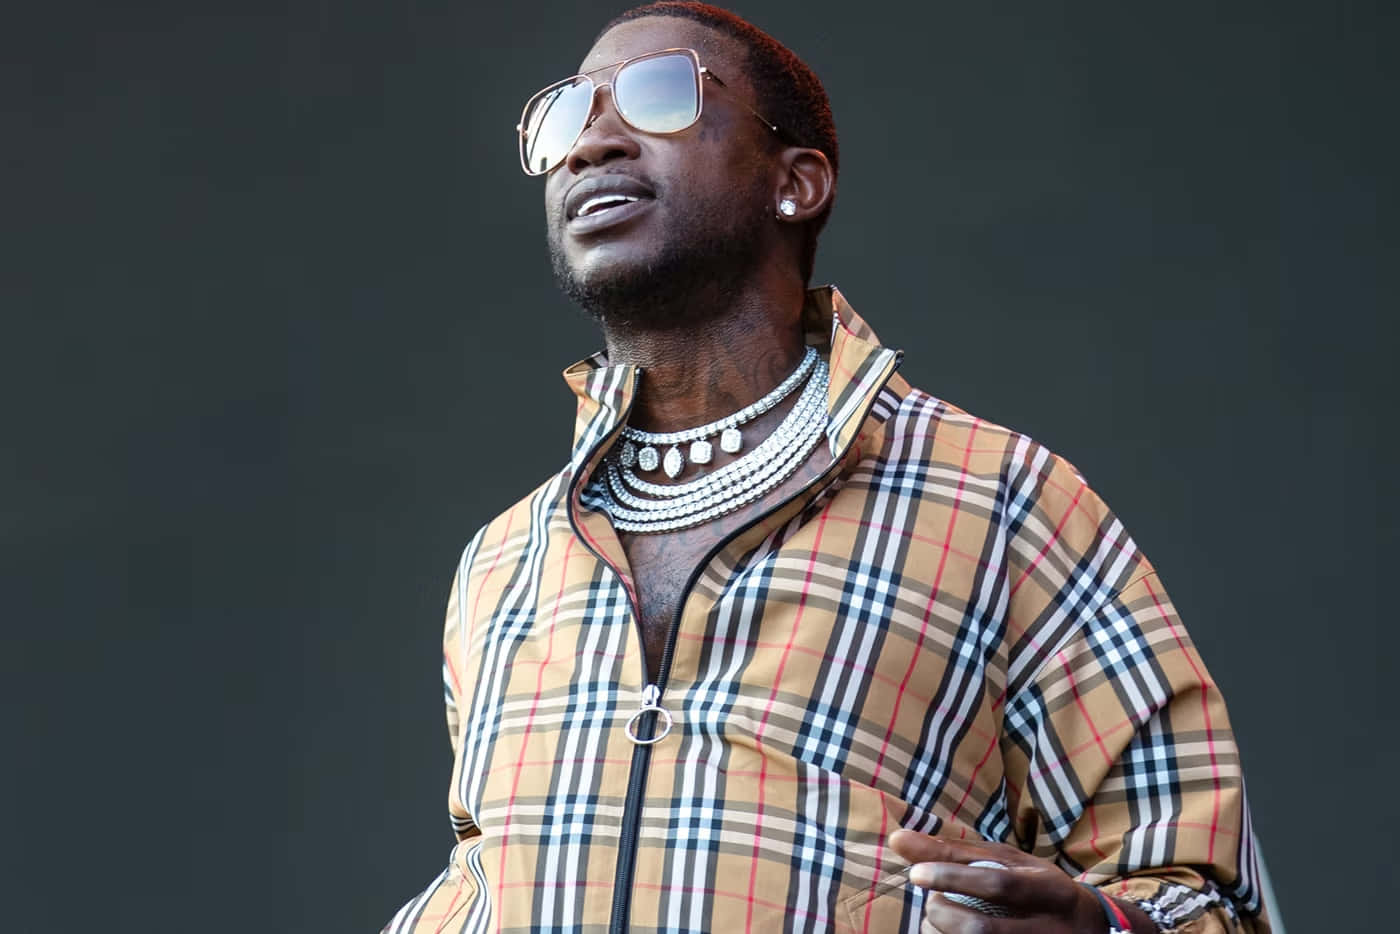 Gucci Mane_ Performing At Event.jpg Background